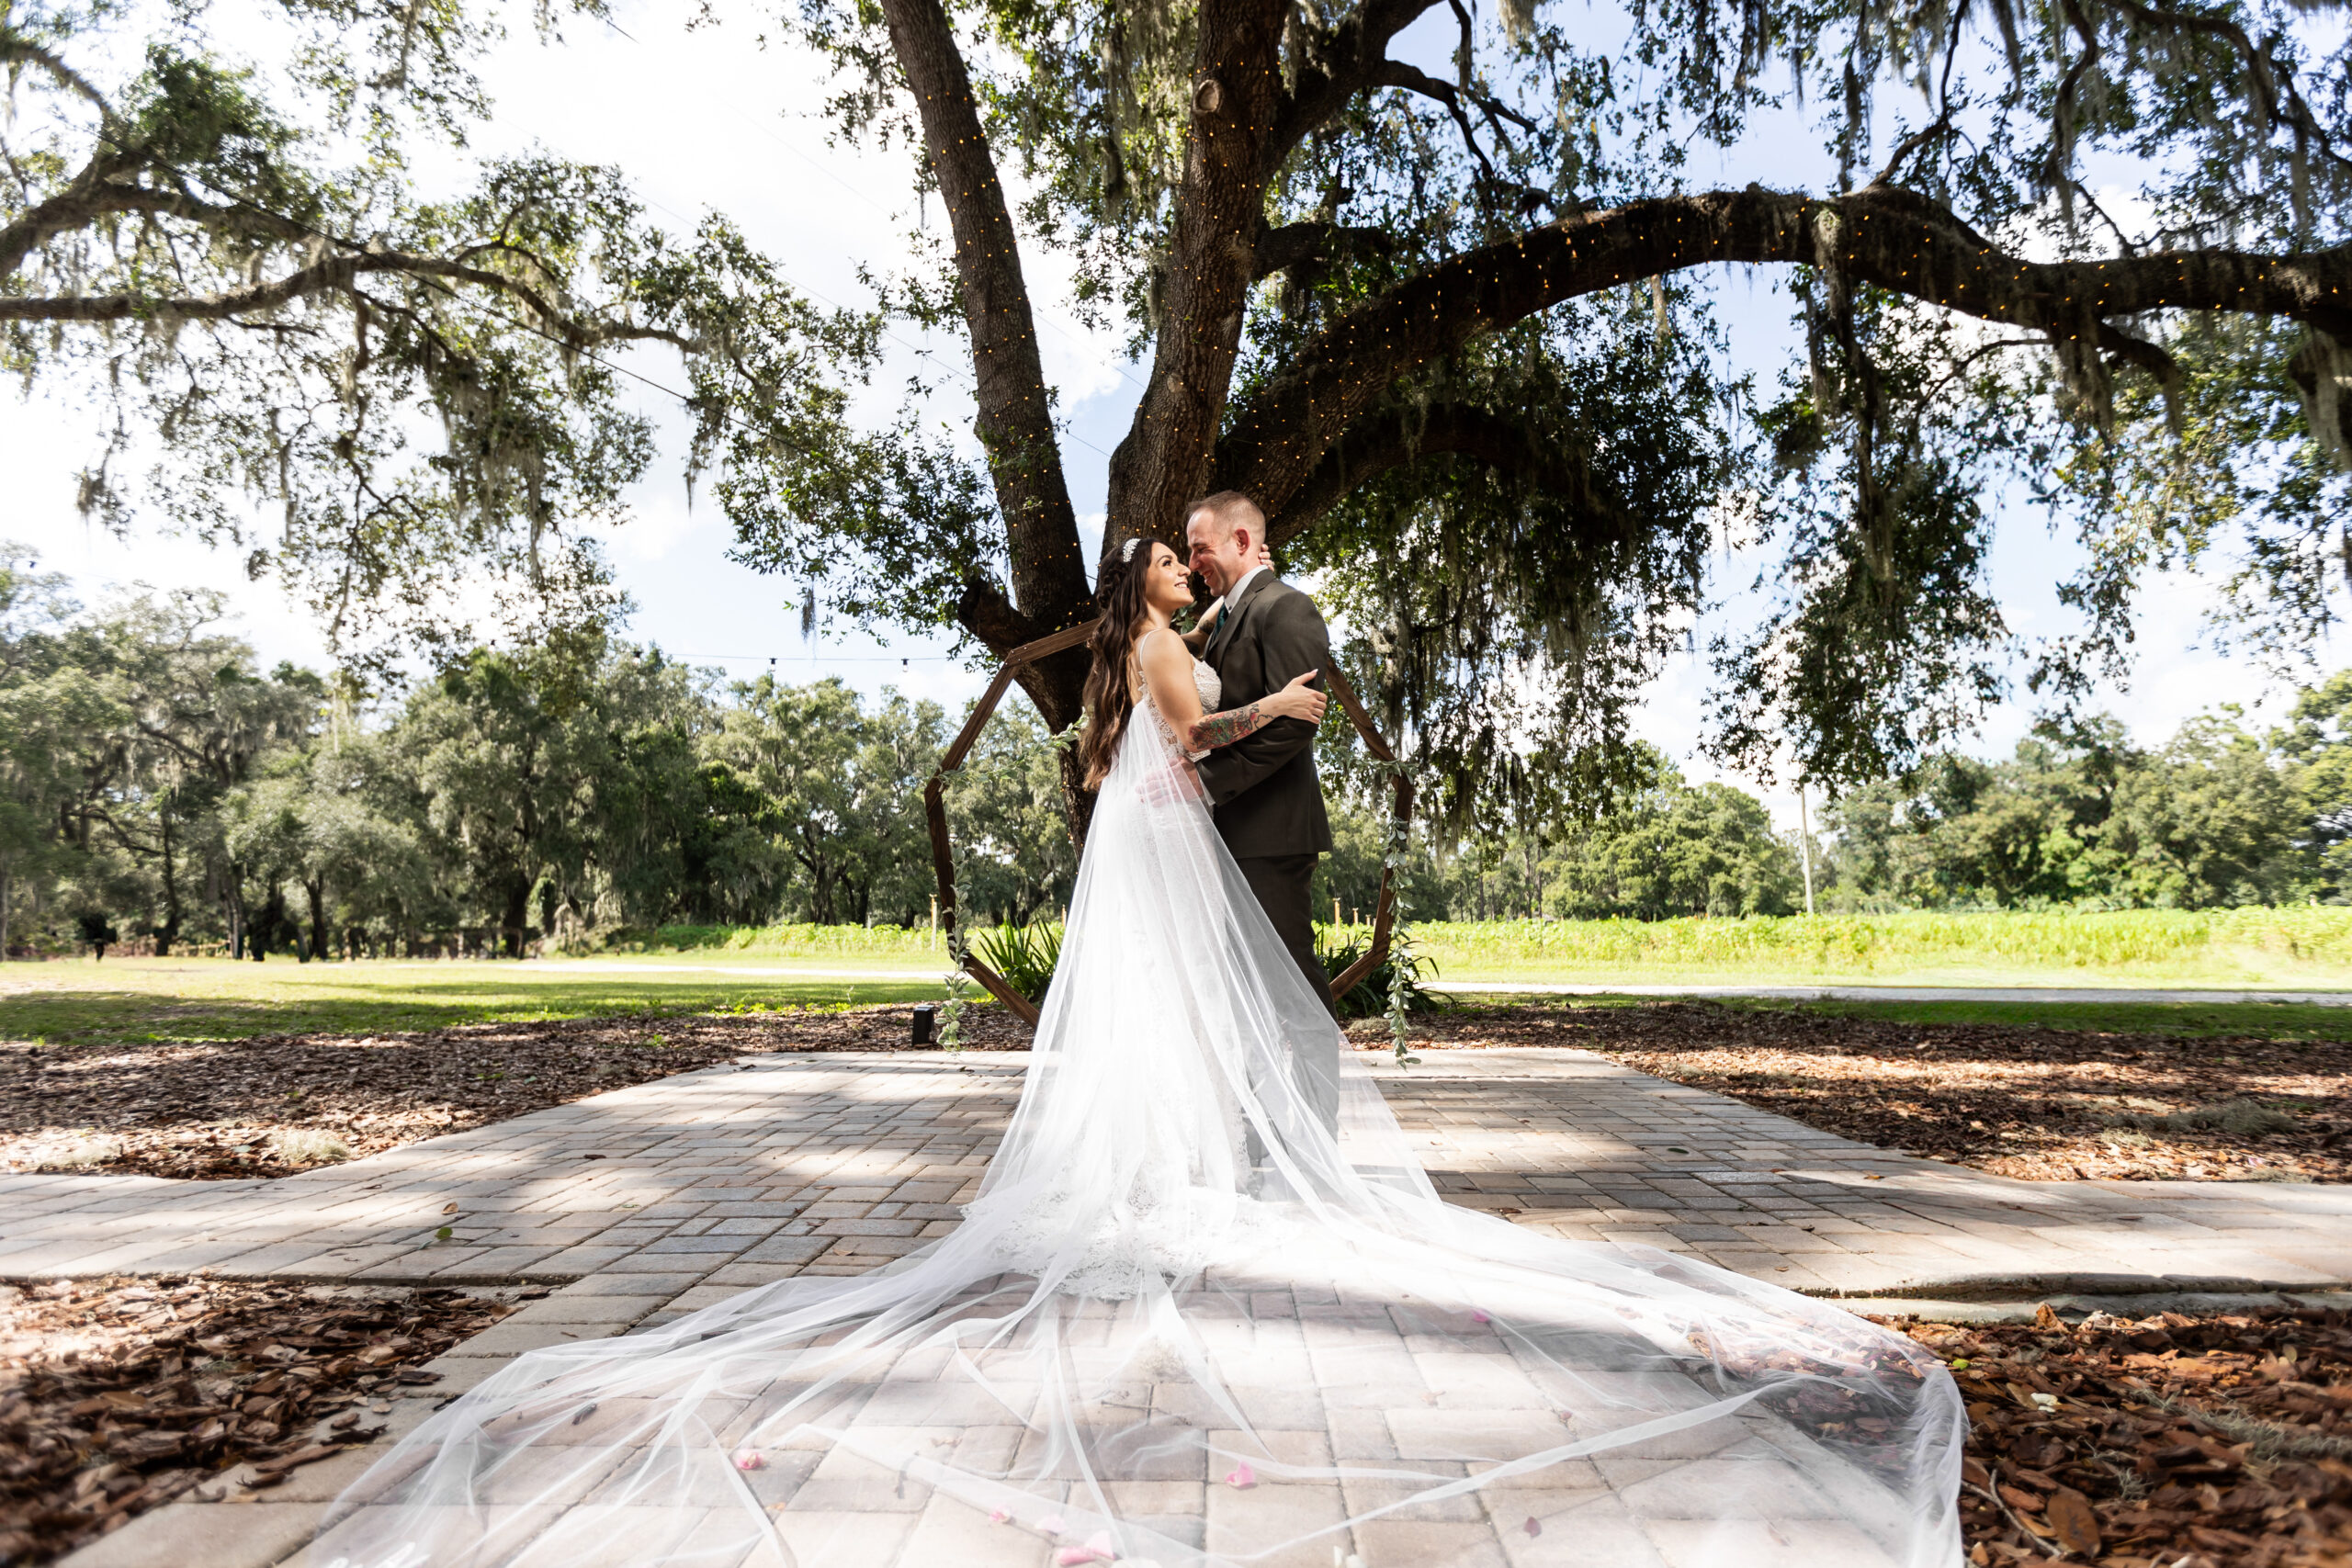 A bride and groom captured by New Jersey Wedding Photographer Jarot Bocanegra, posing under a large oak tree.